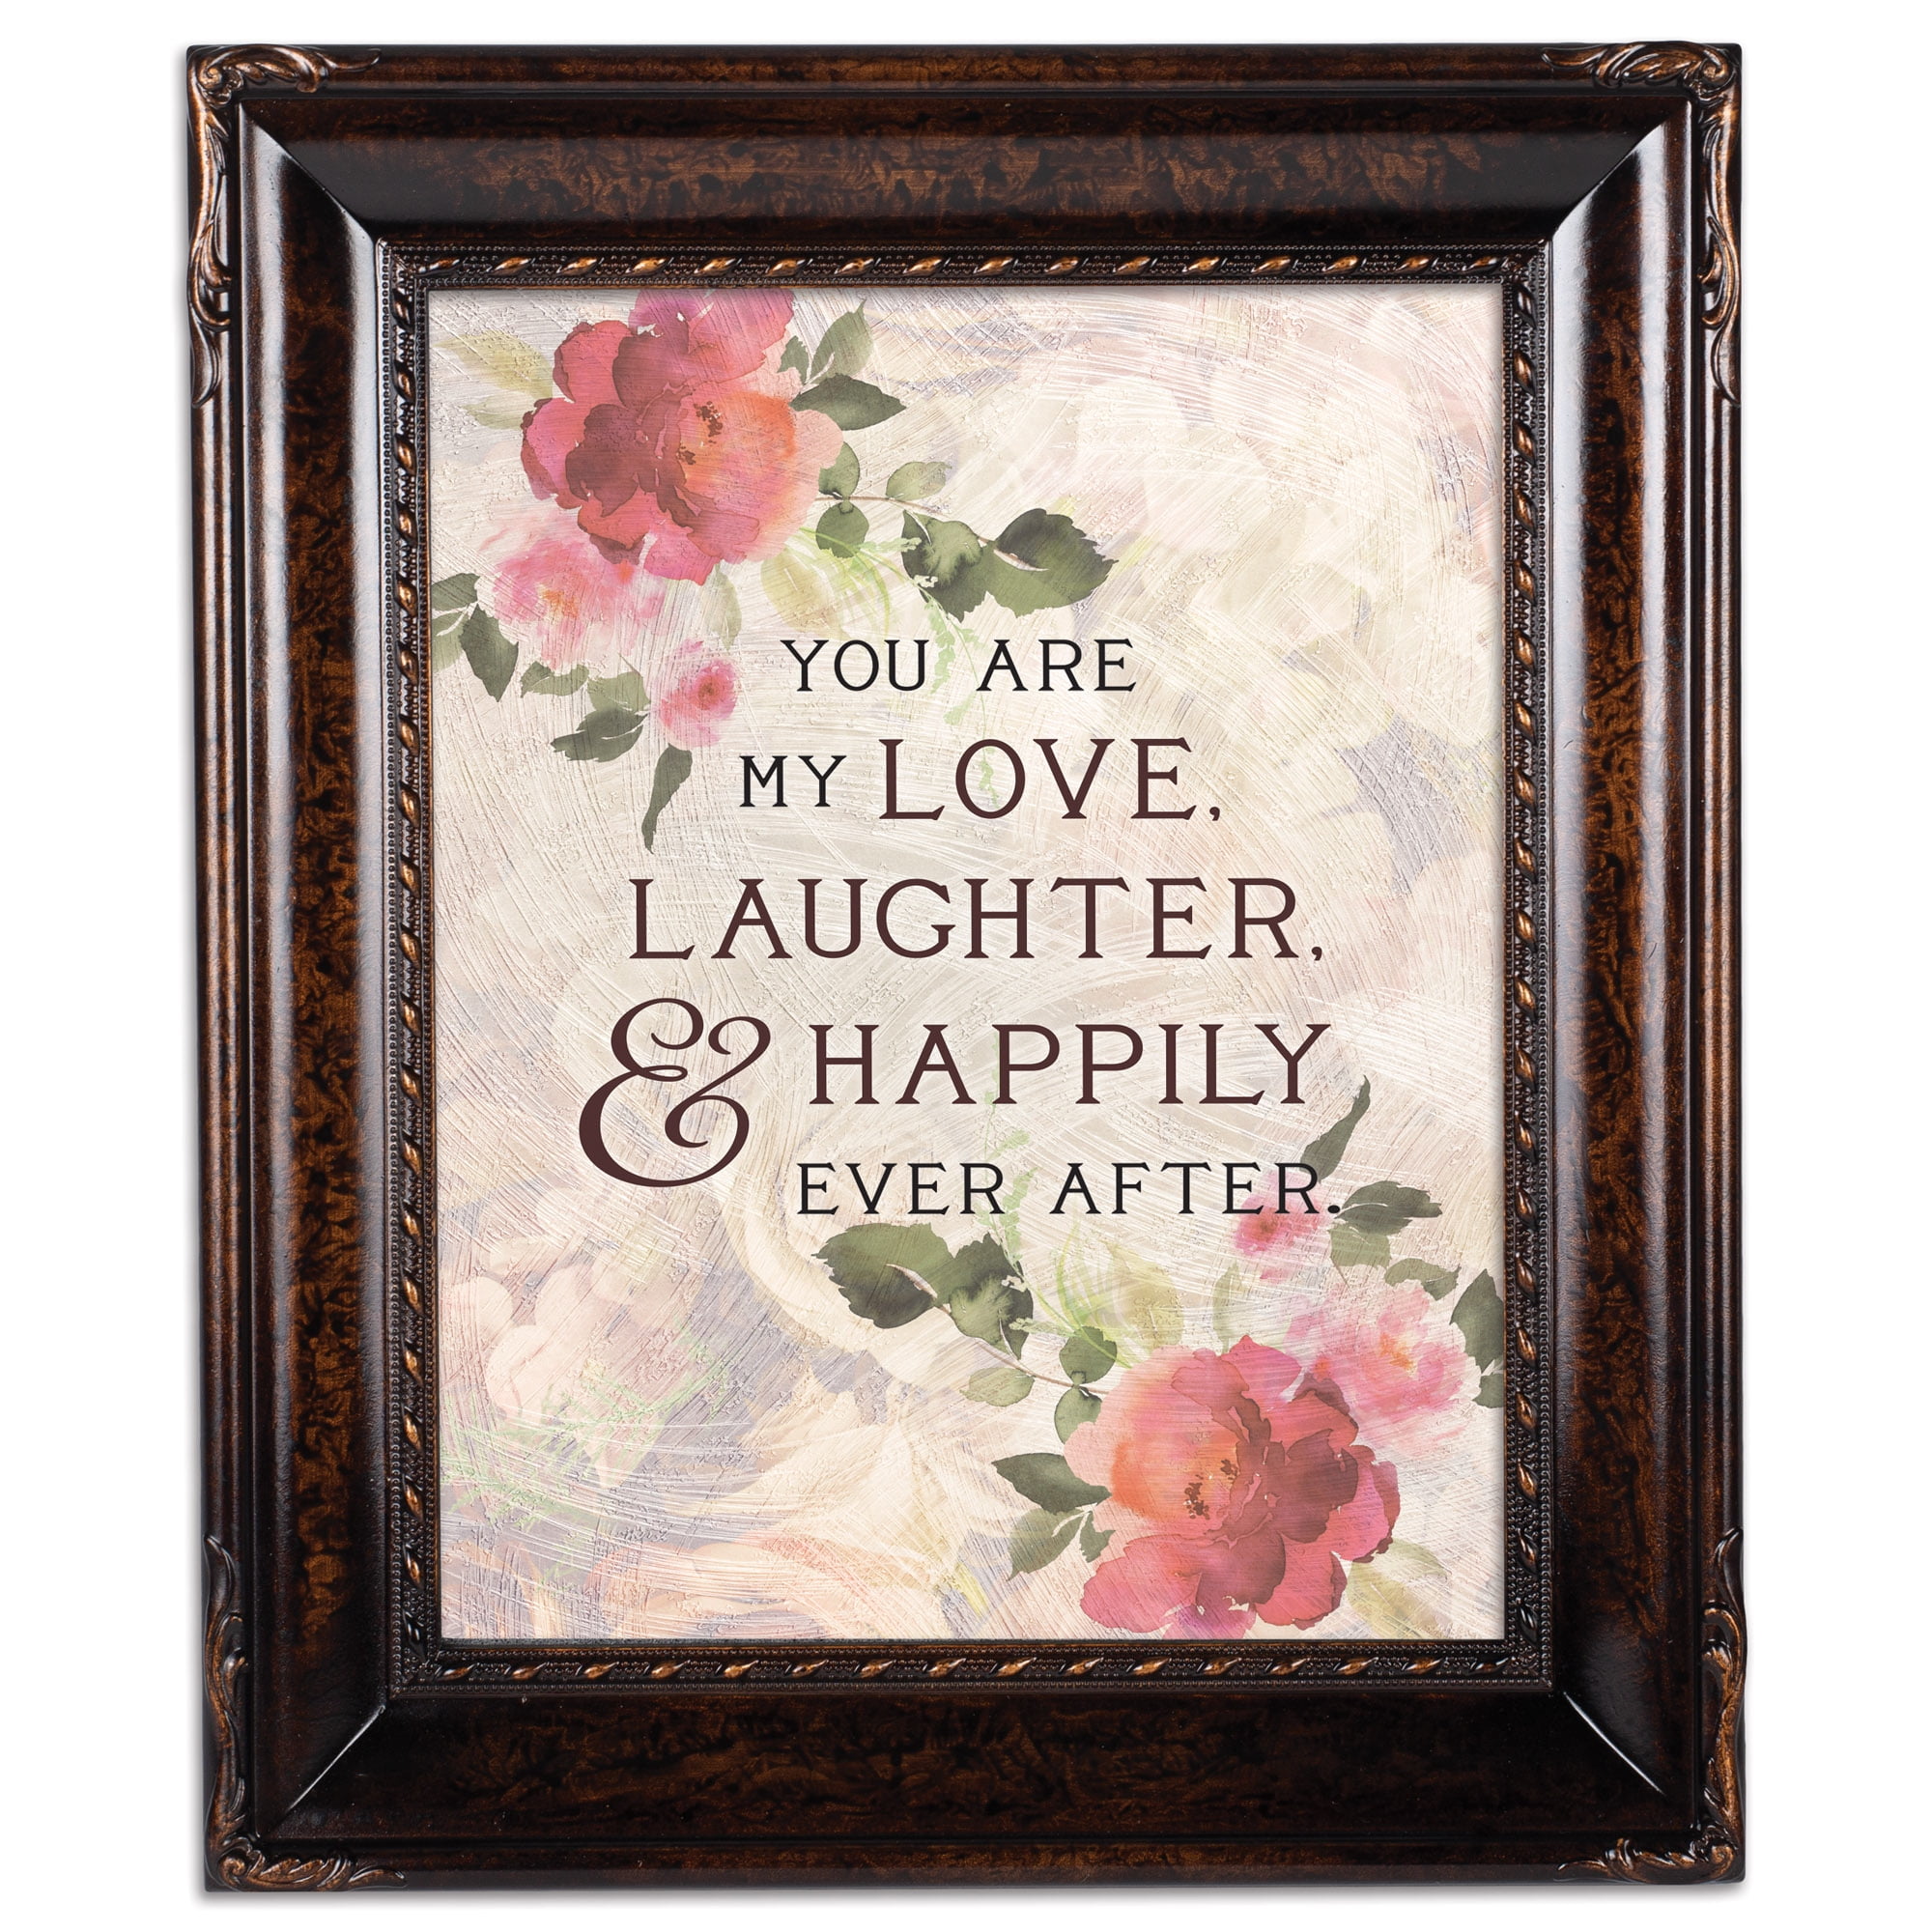 My Happily Ever After Amber 8 x 10 Rope Trim Wall And Tabletop Photo Photo Frame